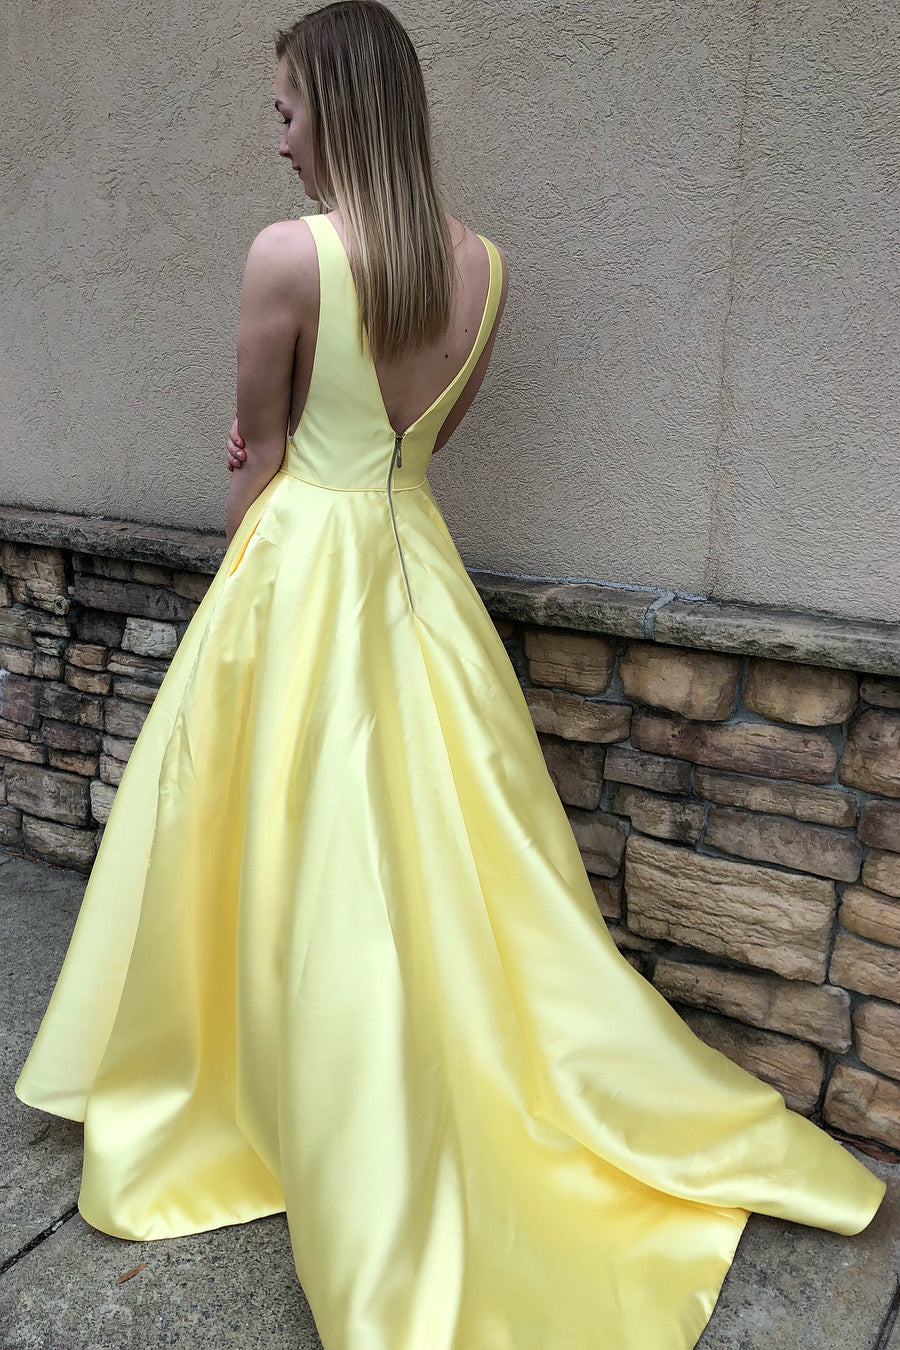 Simple V-Neck Yellow Long Prom Dress